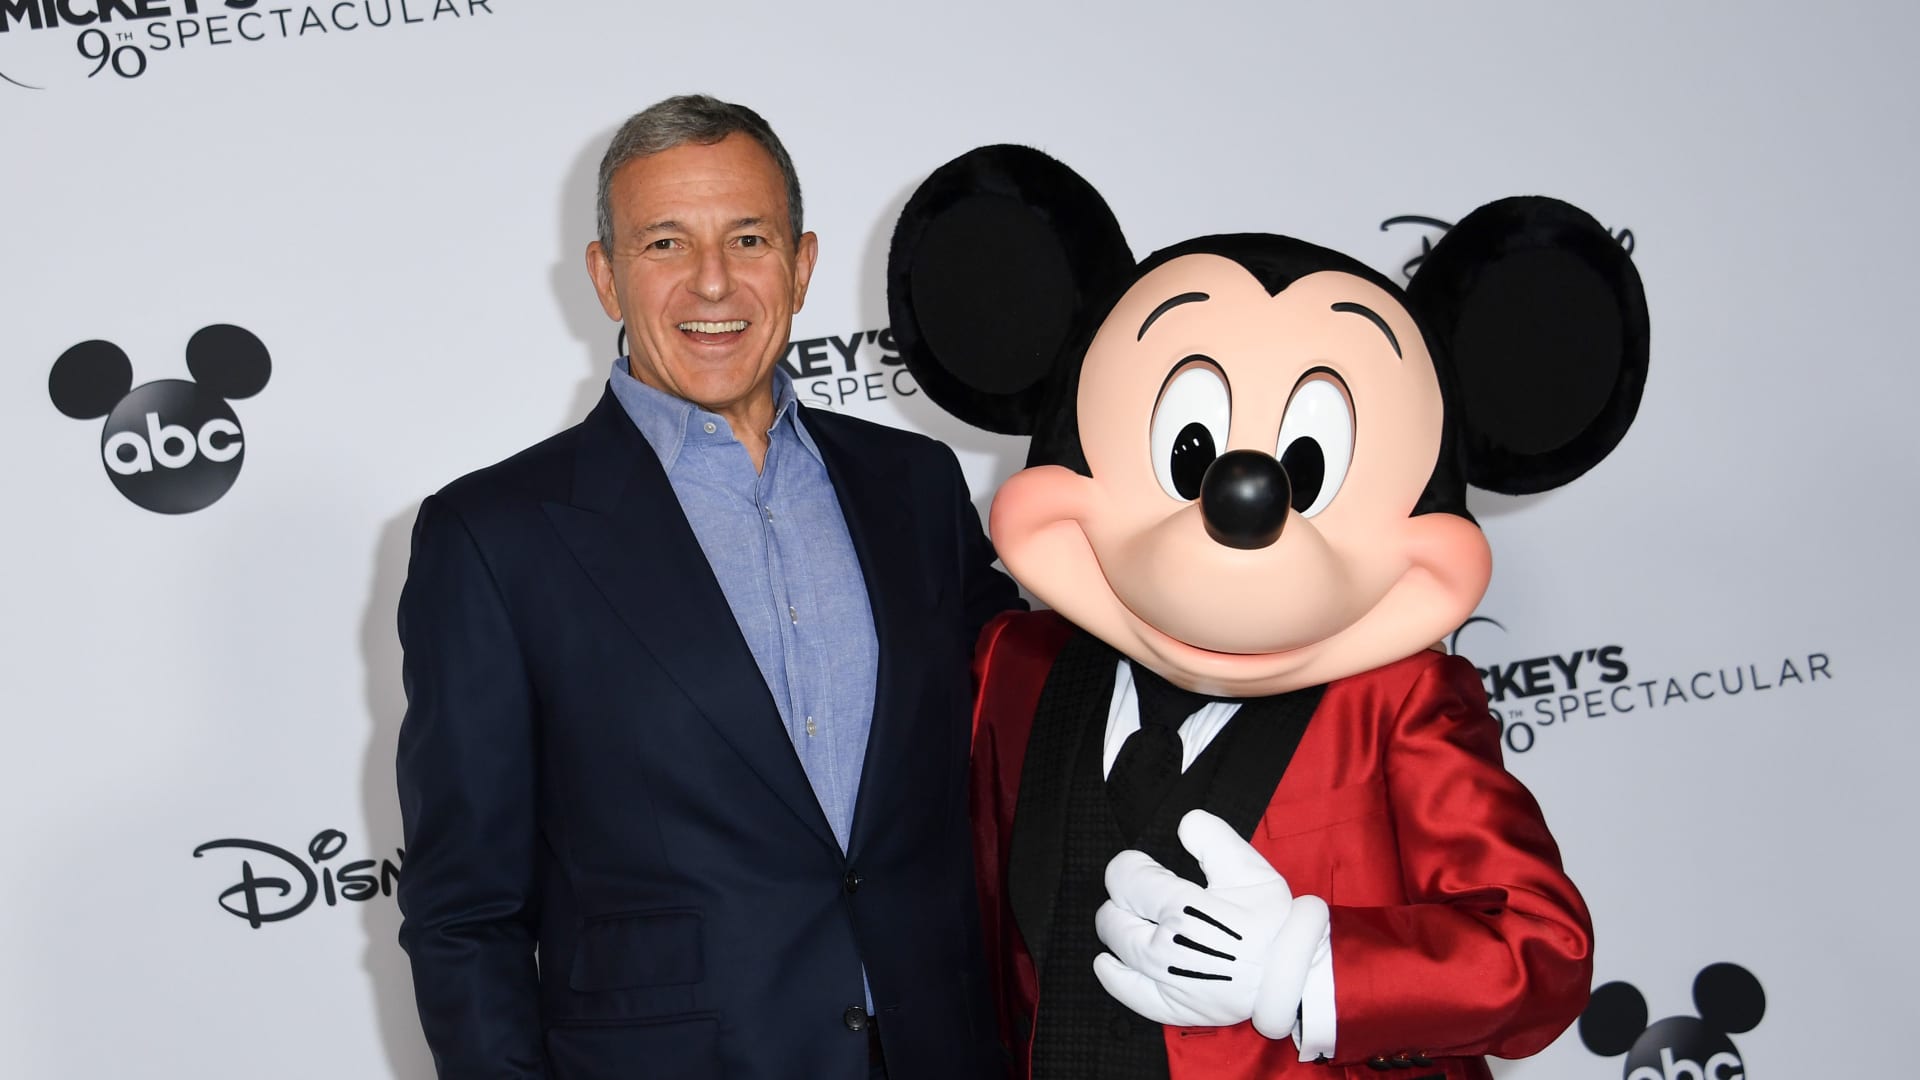 Bob Iger poses with Mickey Mouse attends Mickey's 90th Spectacular at The Shrine Auditorium on October 6, 2018 in Los Angeles.